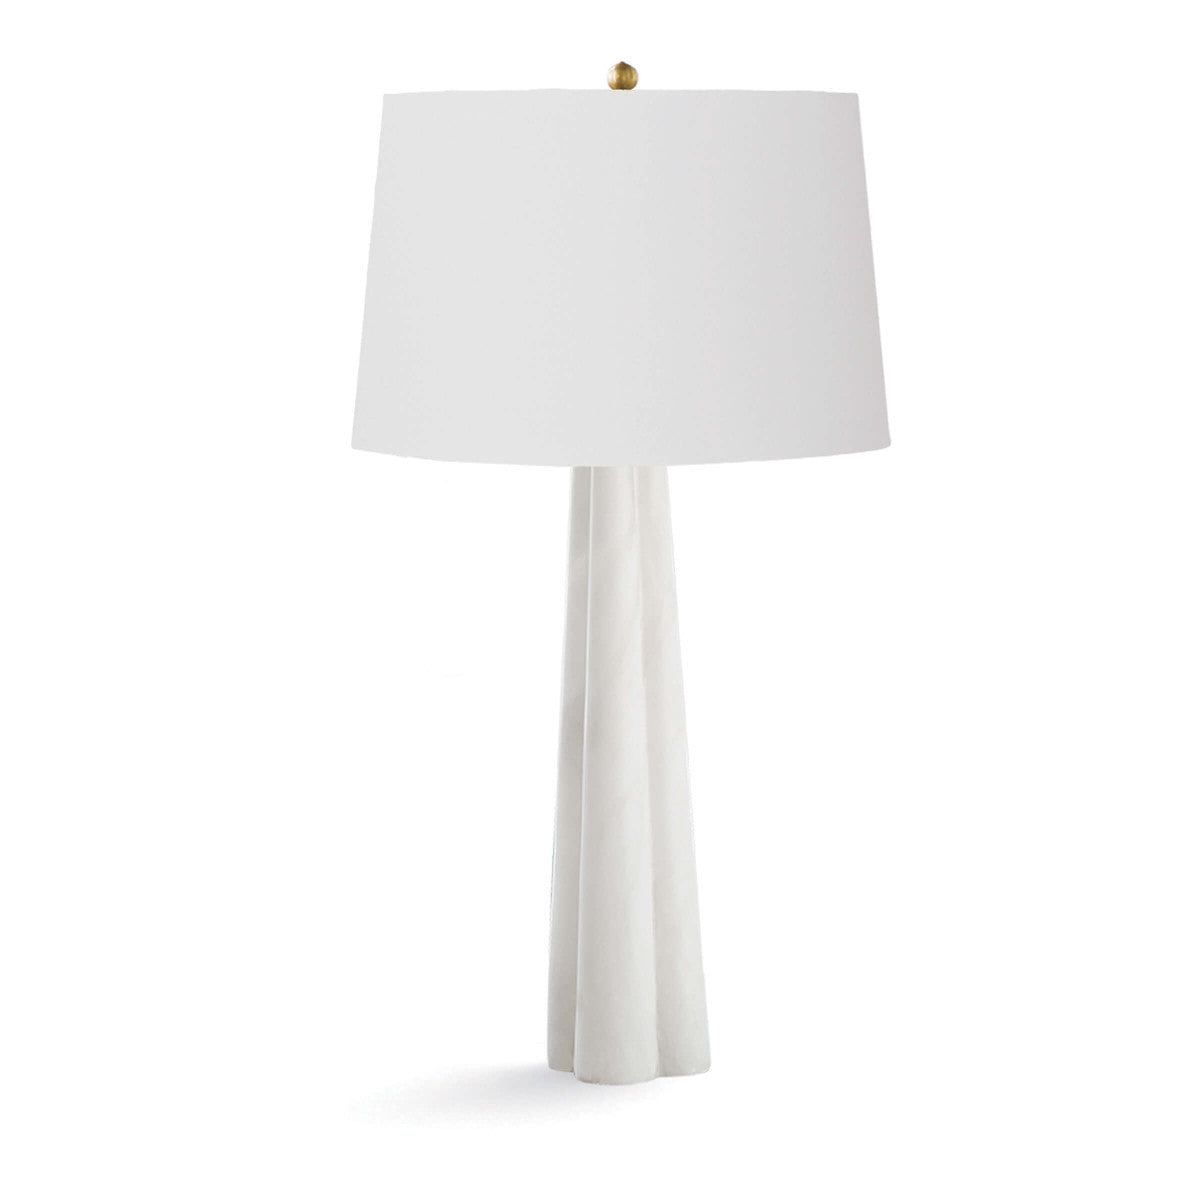 large table lamp with white alabaster lamp